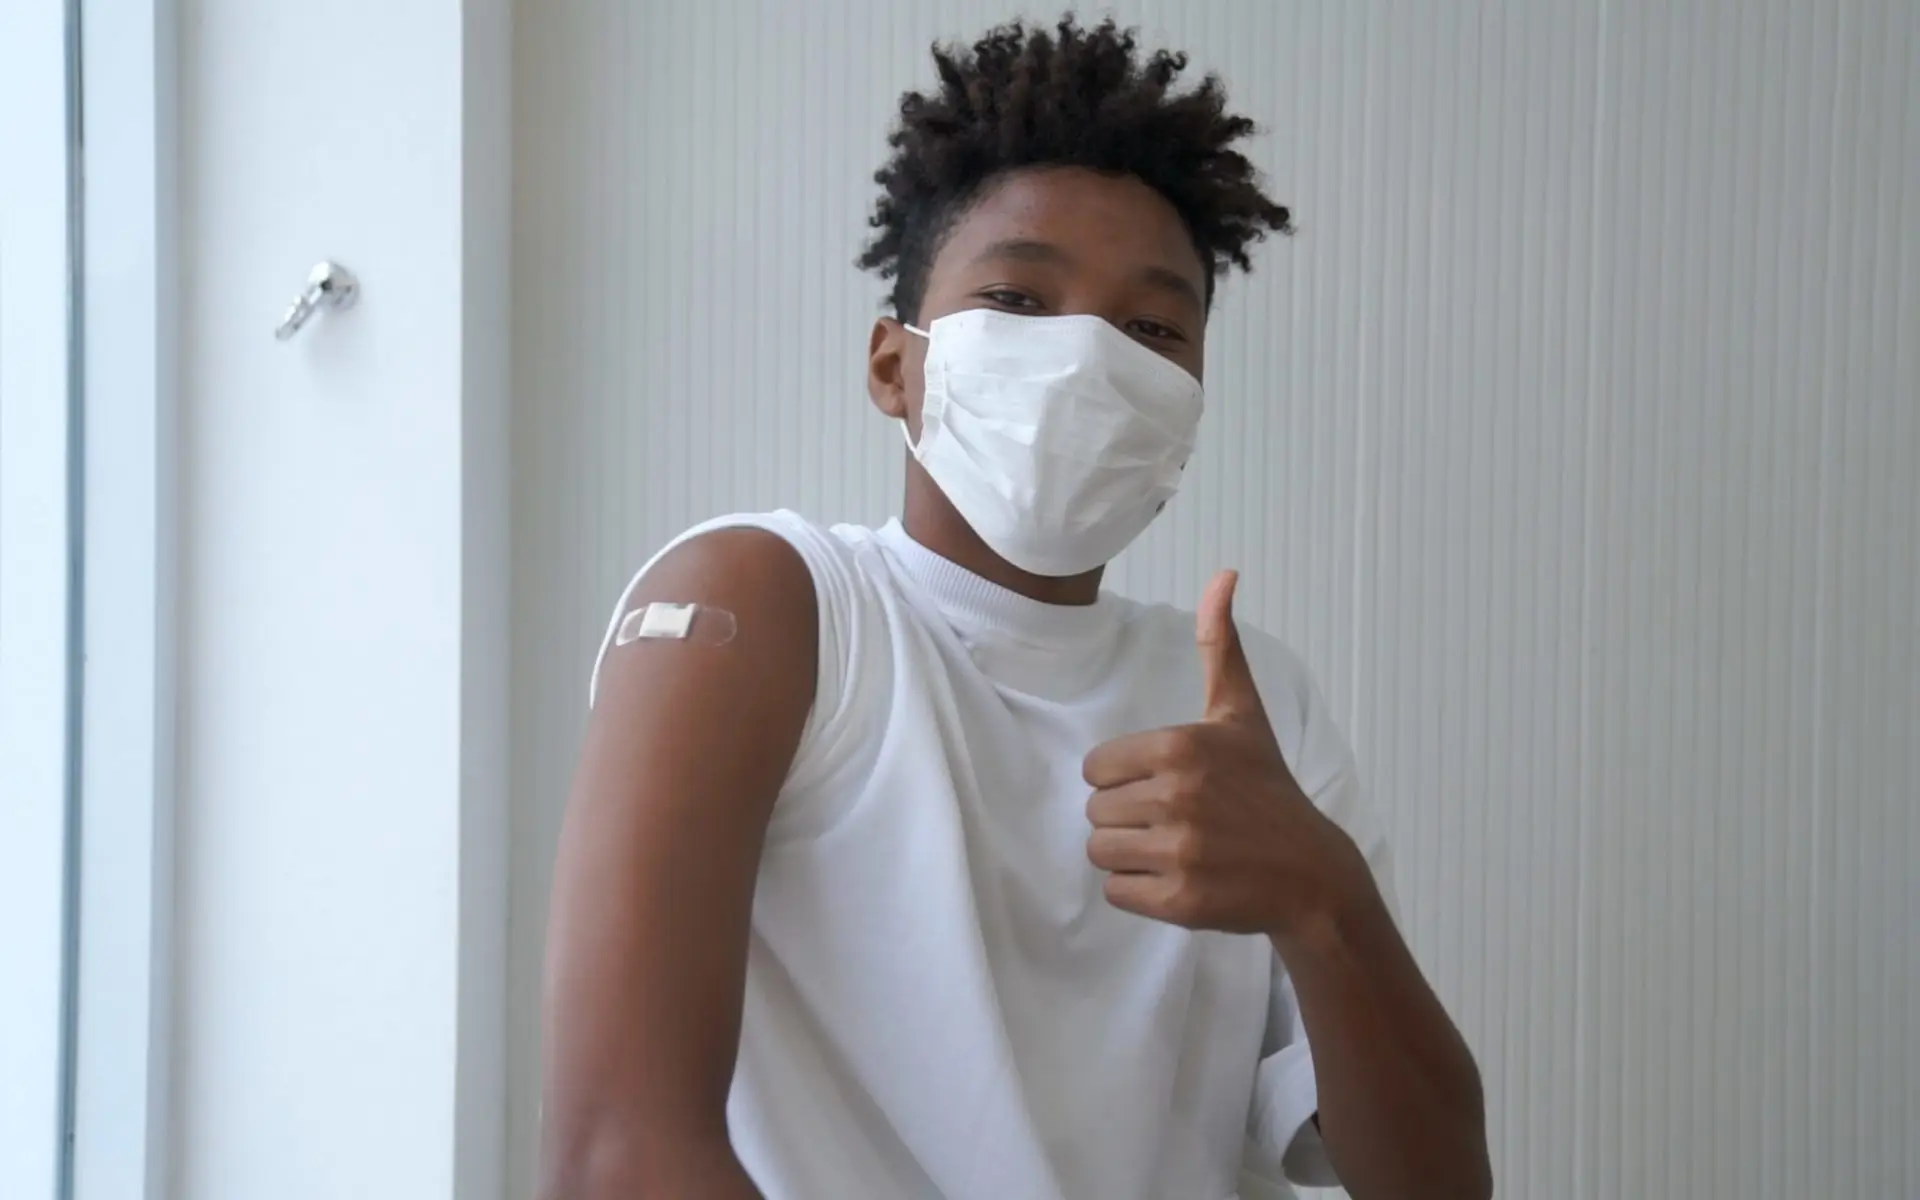 A boy wearing a face mask who approves getting vaccinated